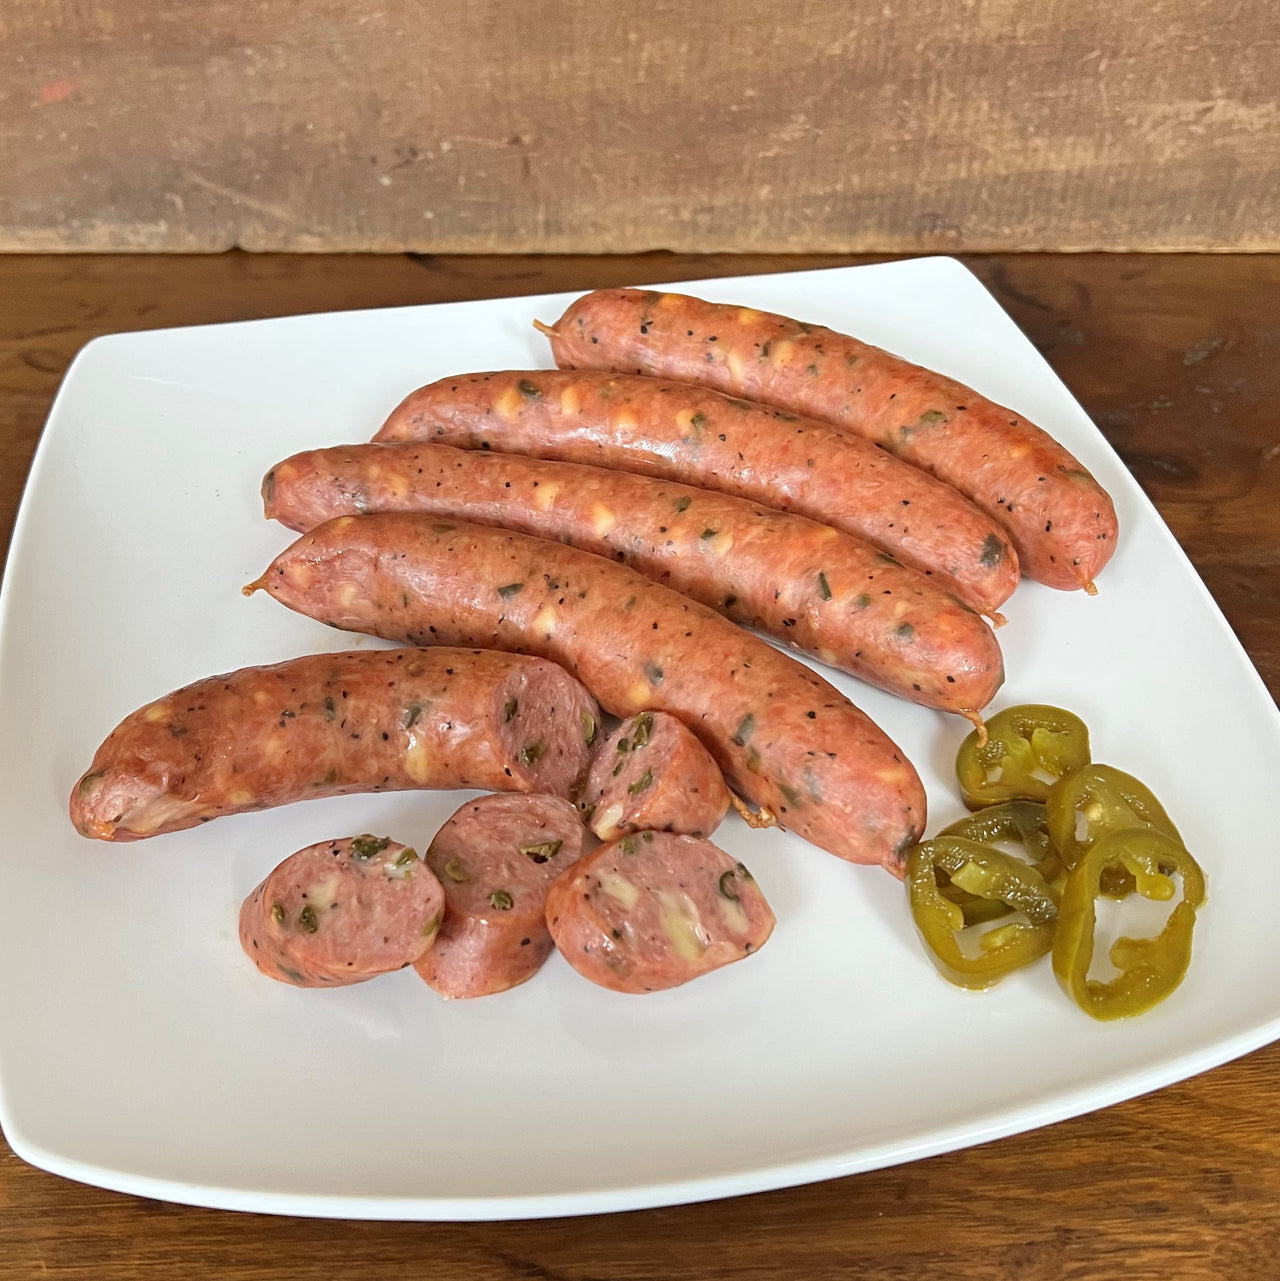 Our Award-Winning Gouda Jalapeno Sausage is a favorite of all who taste it.  Just the right amount of Gouda Cheese and the spice of dried jalapenos make this sausage a great taste by itself or with any side of your choice.  Item #713E  16 oz. Package